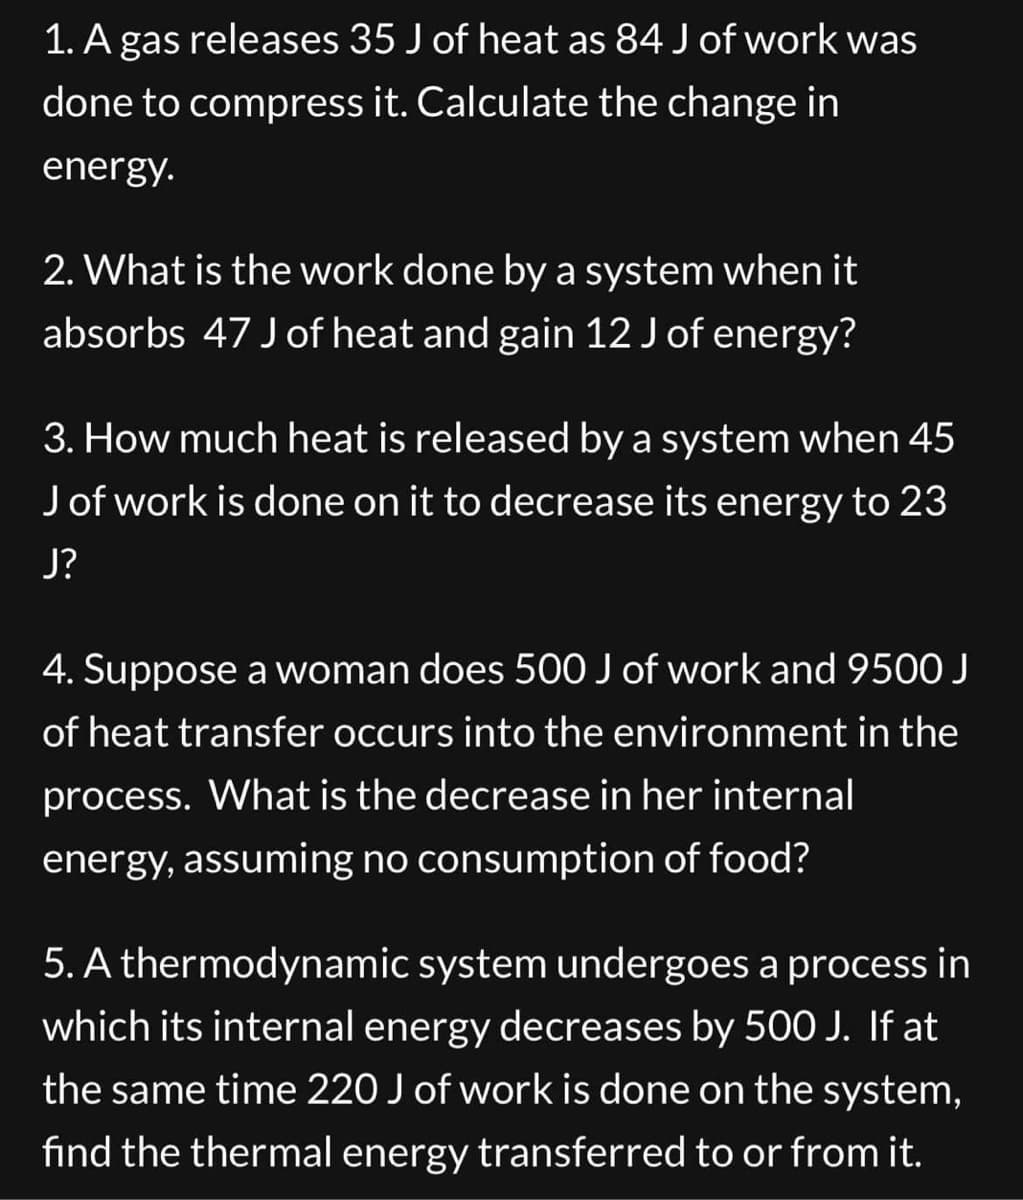 1. A gas releases 35 J of heat as 84 J of work was
done to compress it. Calculate the change in
energy.
2. What is the work done by a system when it
absorbs 47 J of heat and gain 12 J of energy?
3. How much heat is released by a system when 45
J of work is done on it to decrease its energy to 23
J?
4. Suppose a woman does 500 J of work and 9500 J
of heat transfer occurs into the environment in the
process. What is the decrease in her internal
energy, assuming no consumption of food?
5. A thermodynamic system undergoes a process in
which its internal energy decreases by 500 J. If at
the same time 220 J of work is done on the system,
find the thermal energy transferred to or from it.